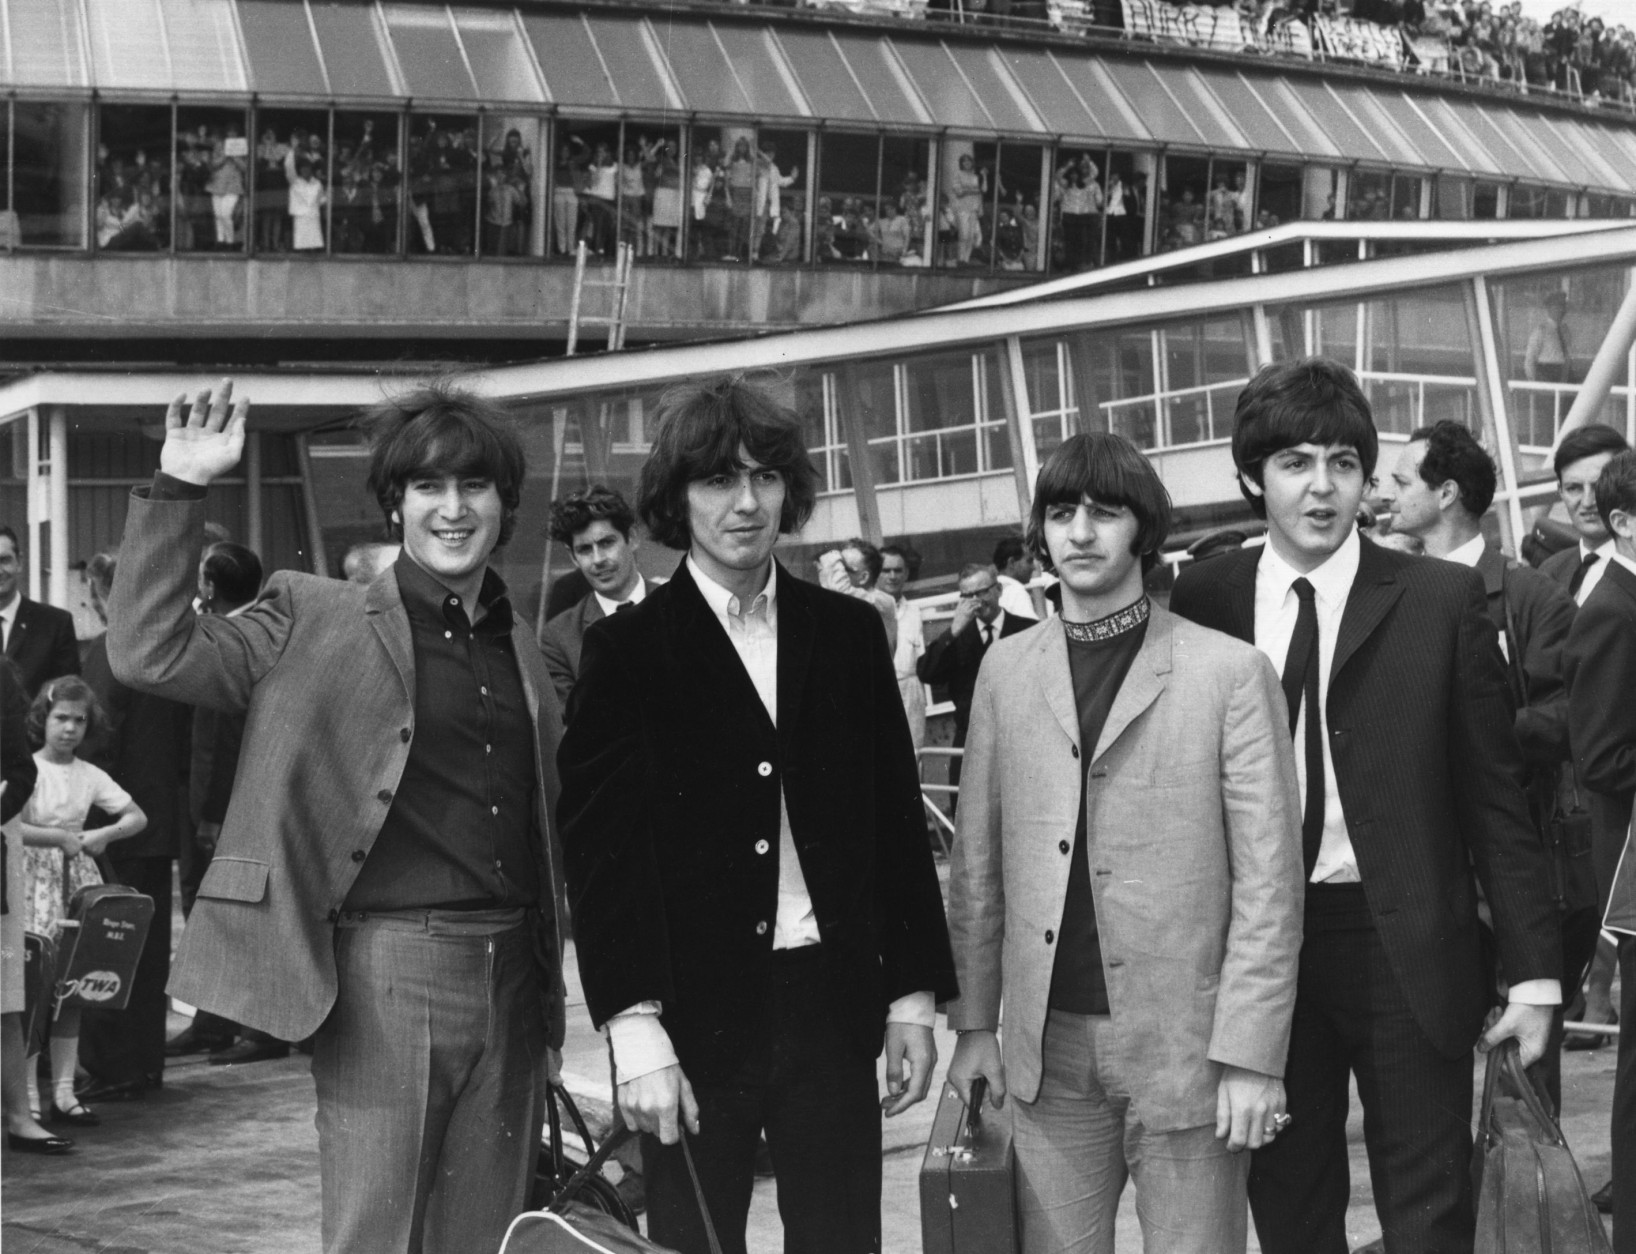 13th August 1965:  Hundreds of teenagers gather at London Airport to give pop group The Beatles a send-off before they board an aeroplane to America.  (Photo by Keystone/Getty Images)